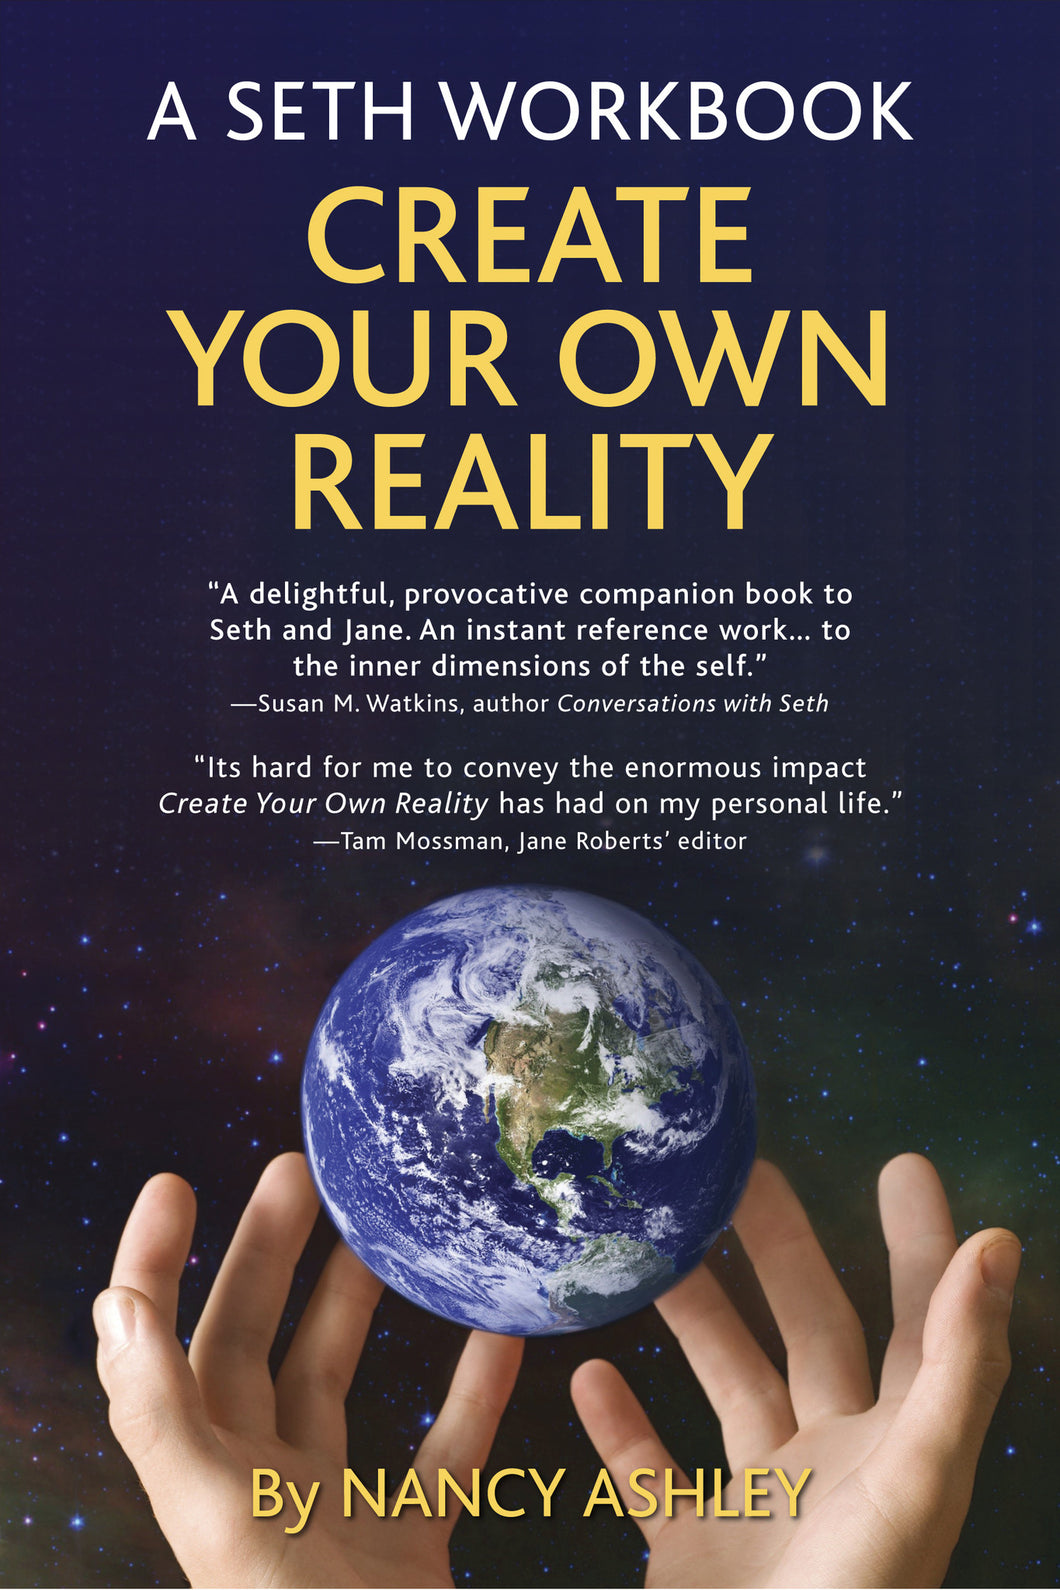 A Seth Workbook: Create Your Own Reality <br> (New Release) by Nancy Ashley